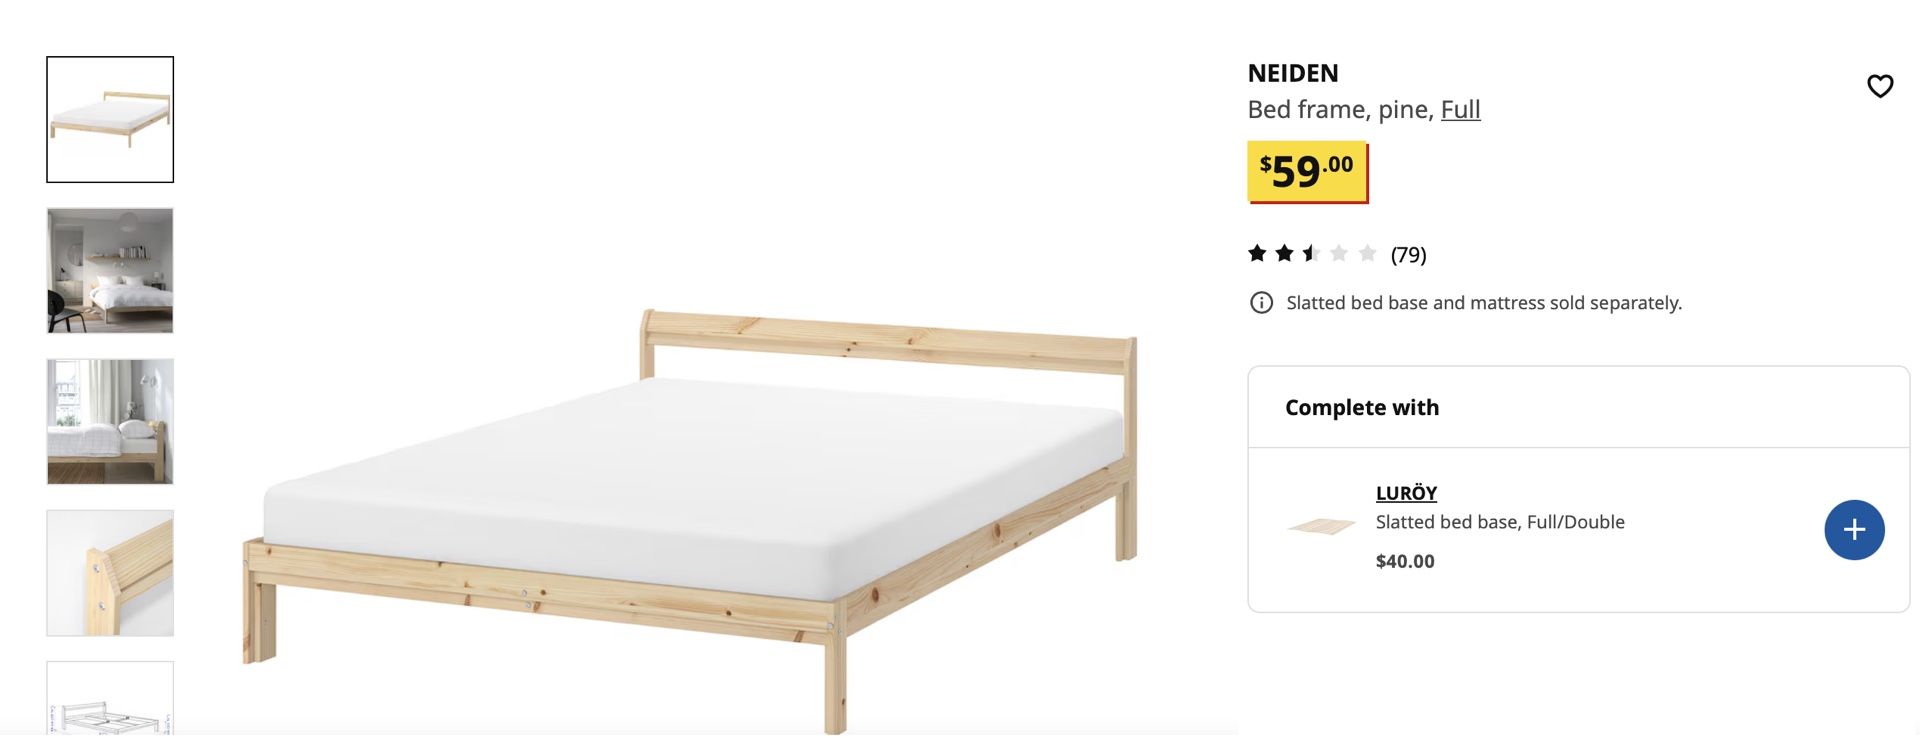 IKEA Bed Frame (Full/Double) with Slatted Bed Base